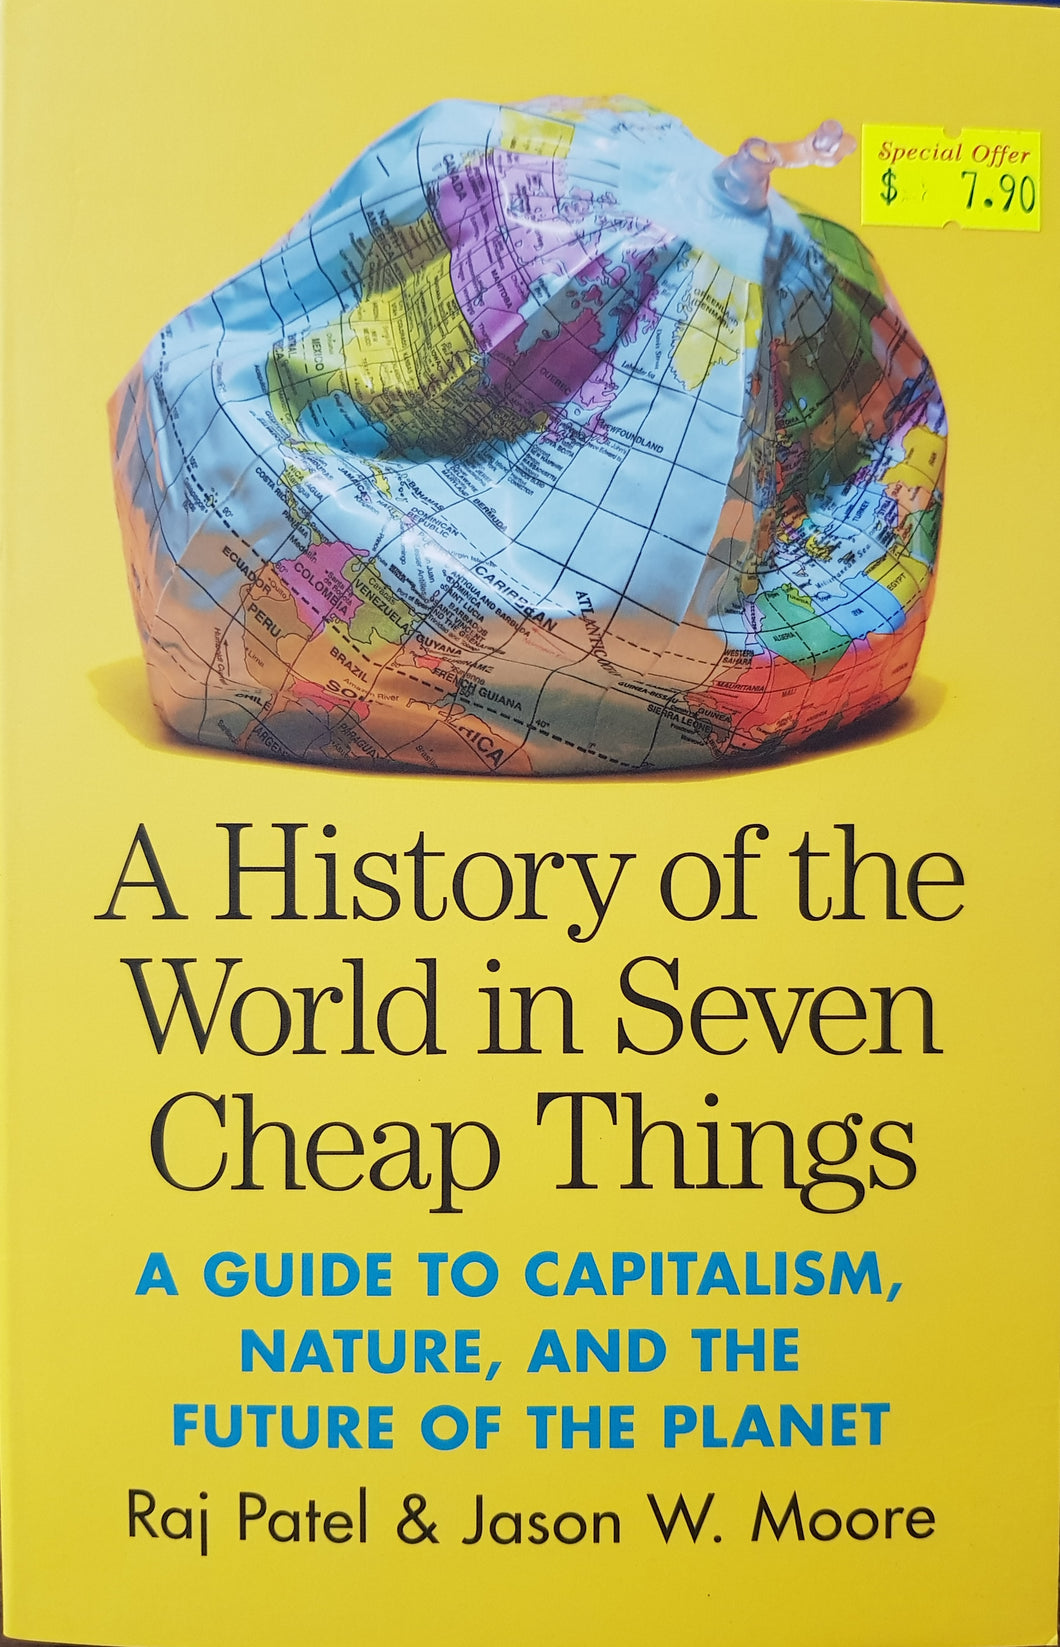 A History of the World in Seven Cheap Things - Raj Patel & Jason W. Moore